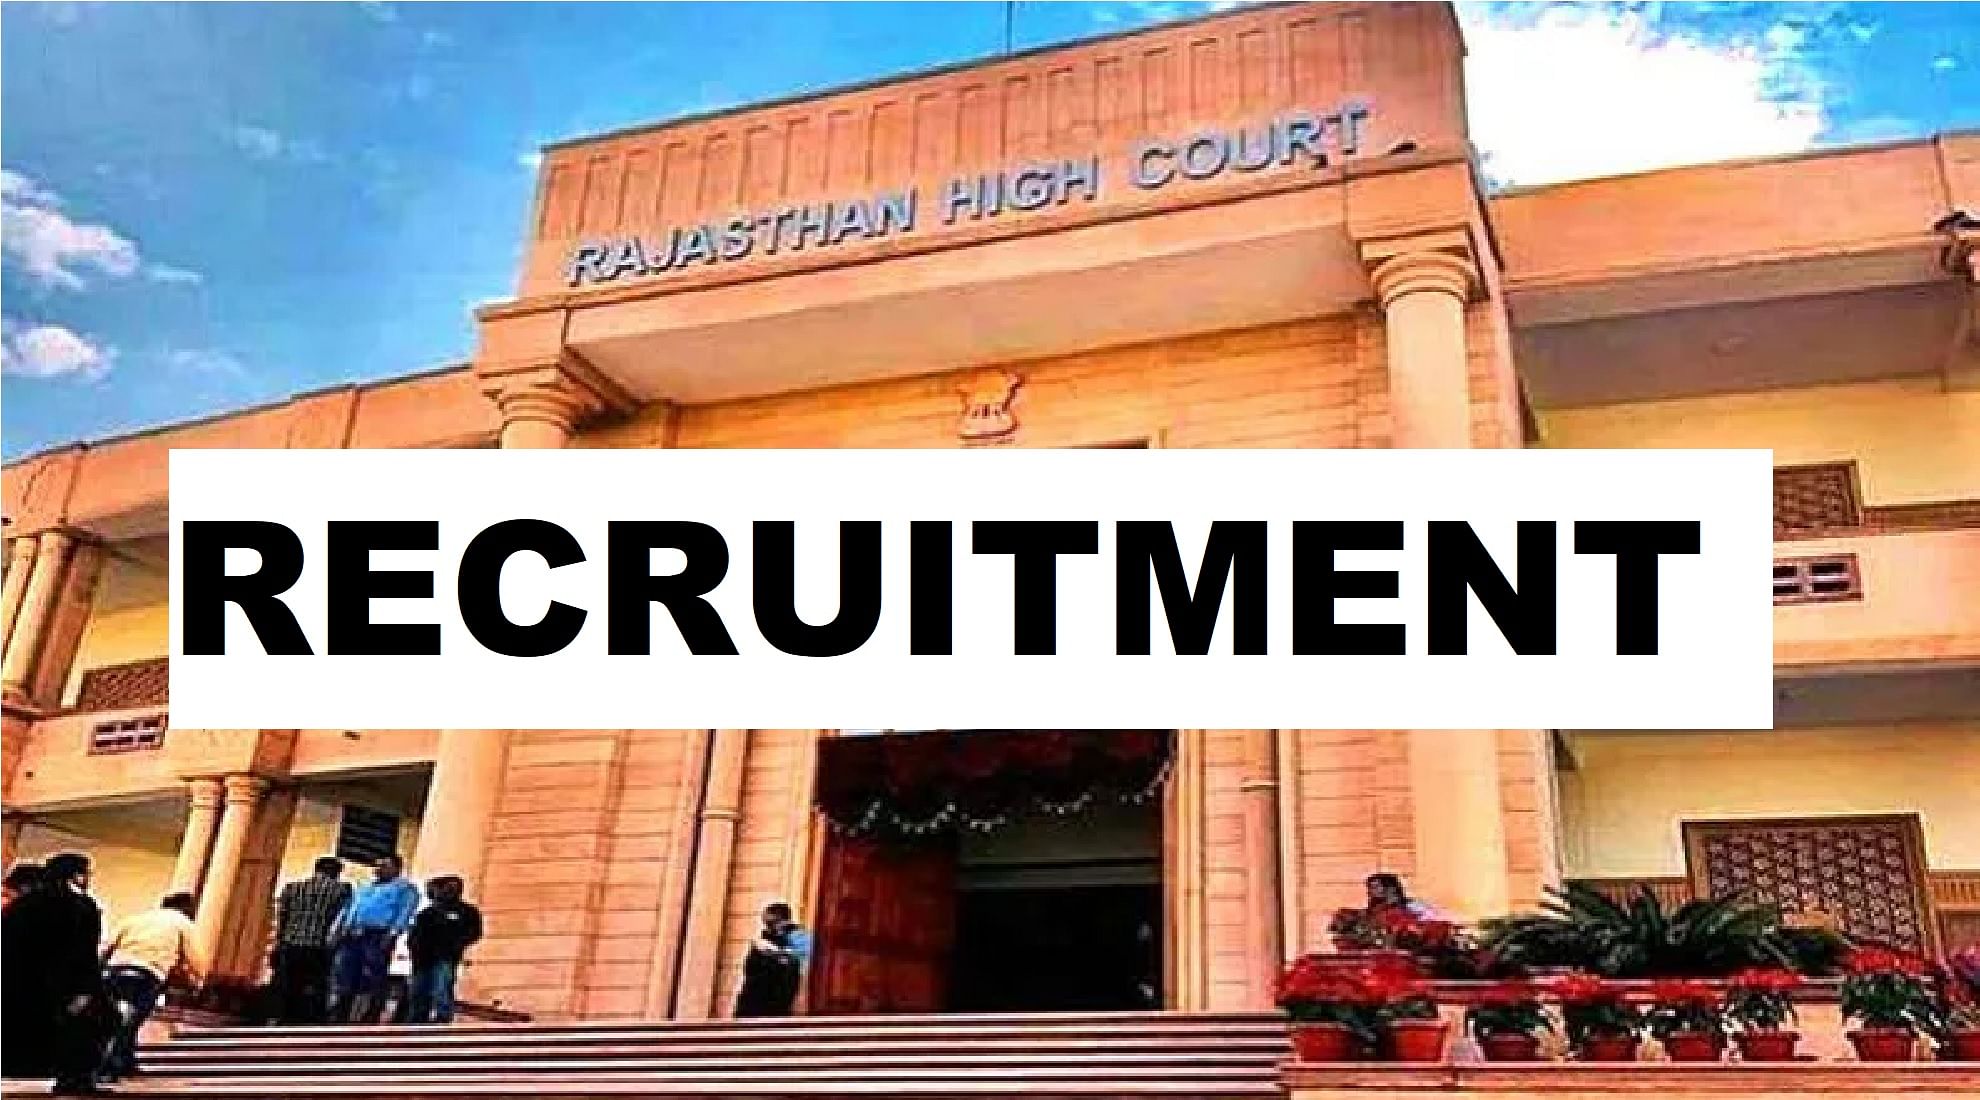 Rajasthan High Court Begins Recruitment for 2756 Vacancies, Know Eligibility and Other Detail Here